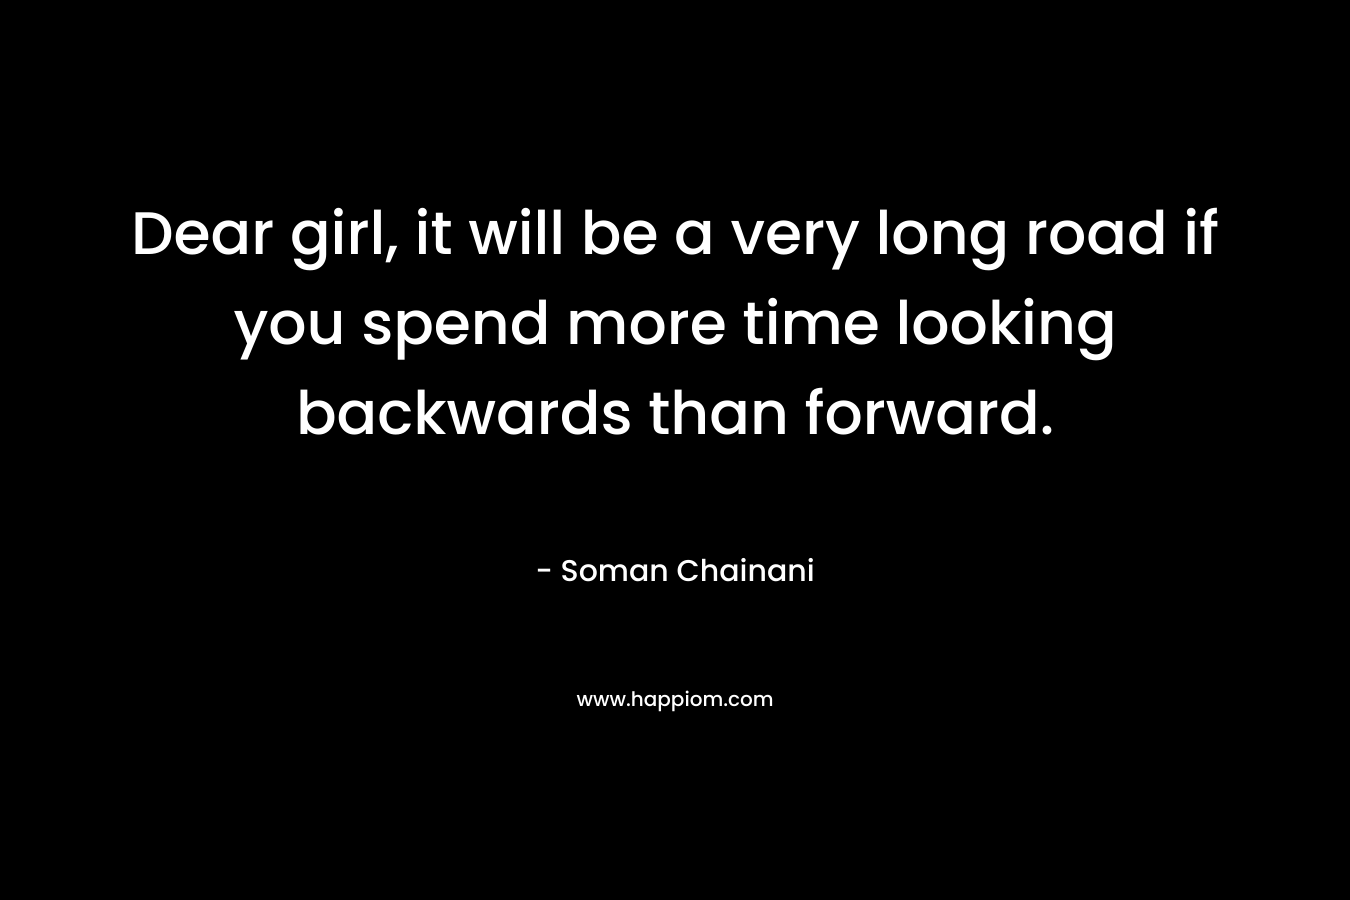 Dear girl, it will be a very long road if you spend more time looking backwards than forward.